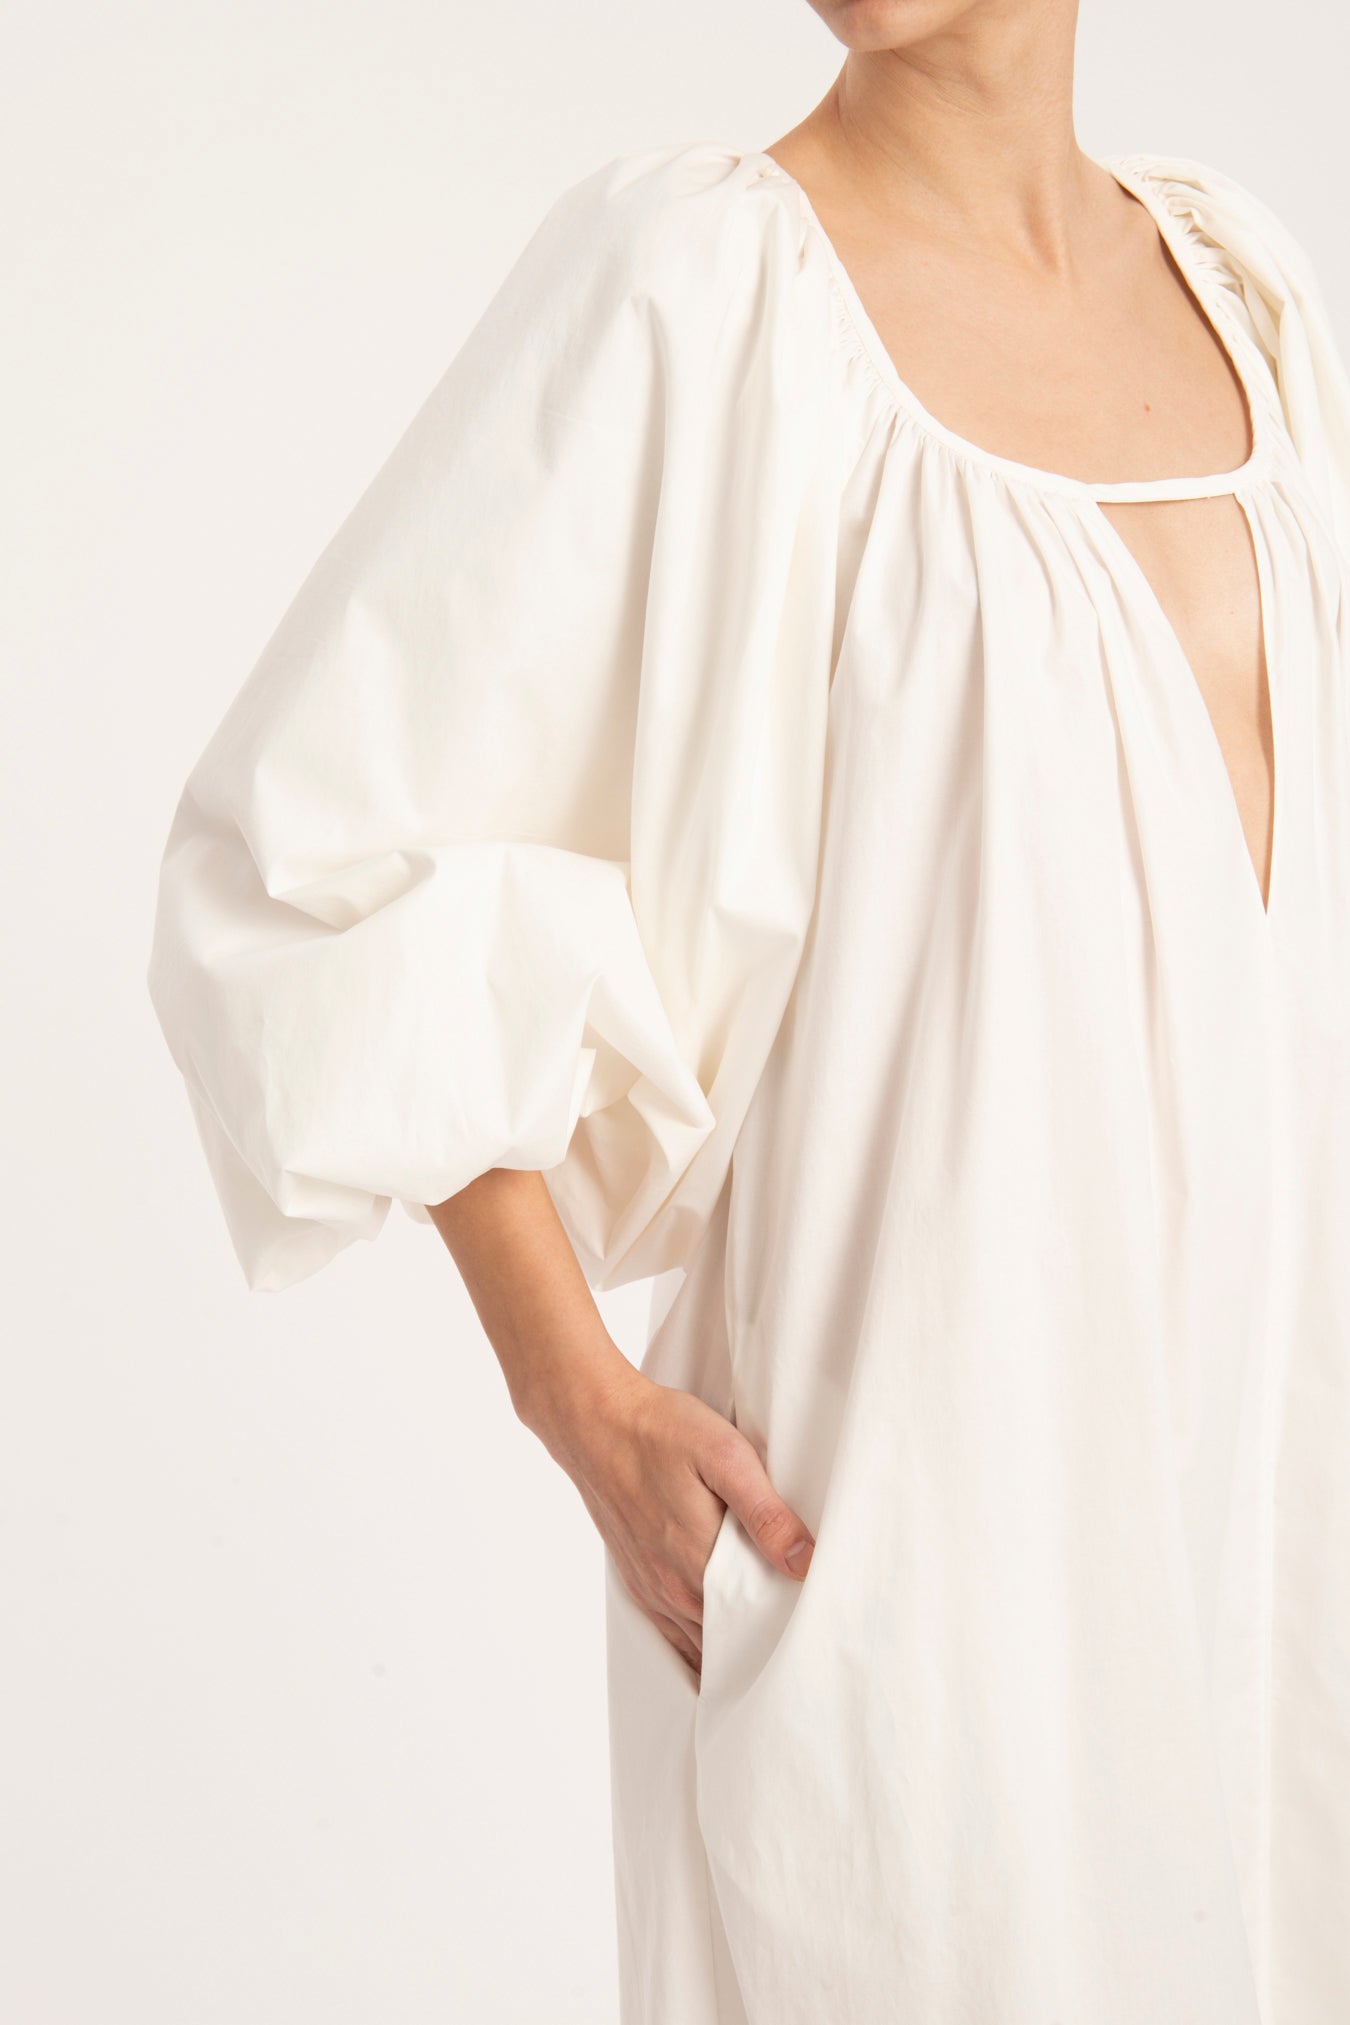 Effortless Chic Off White Puff-Sleeved Long Dress Detail